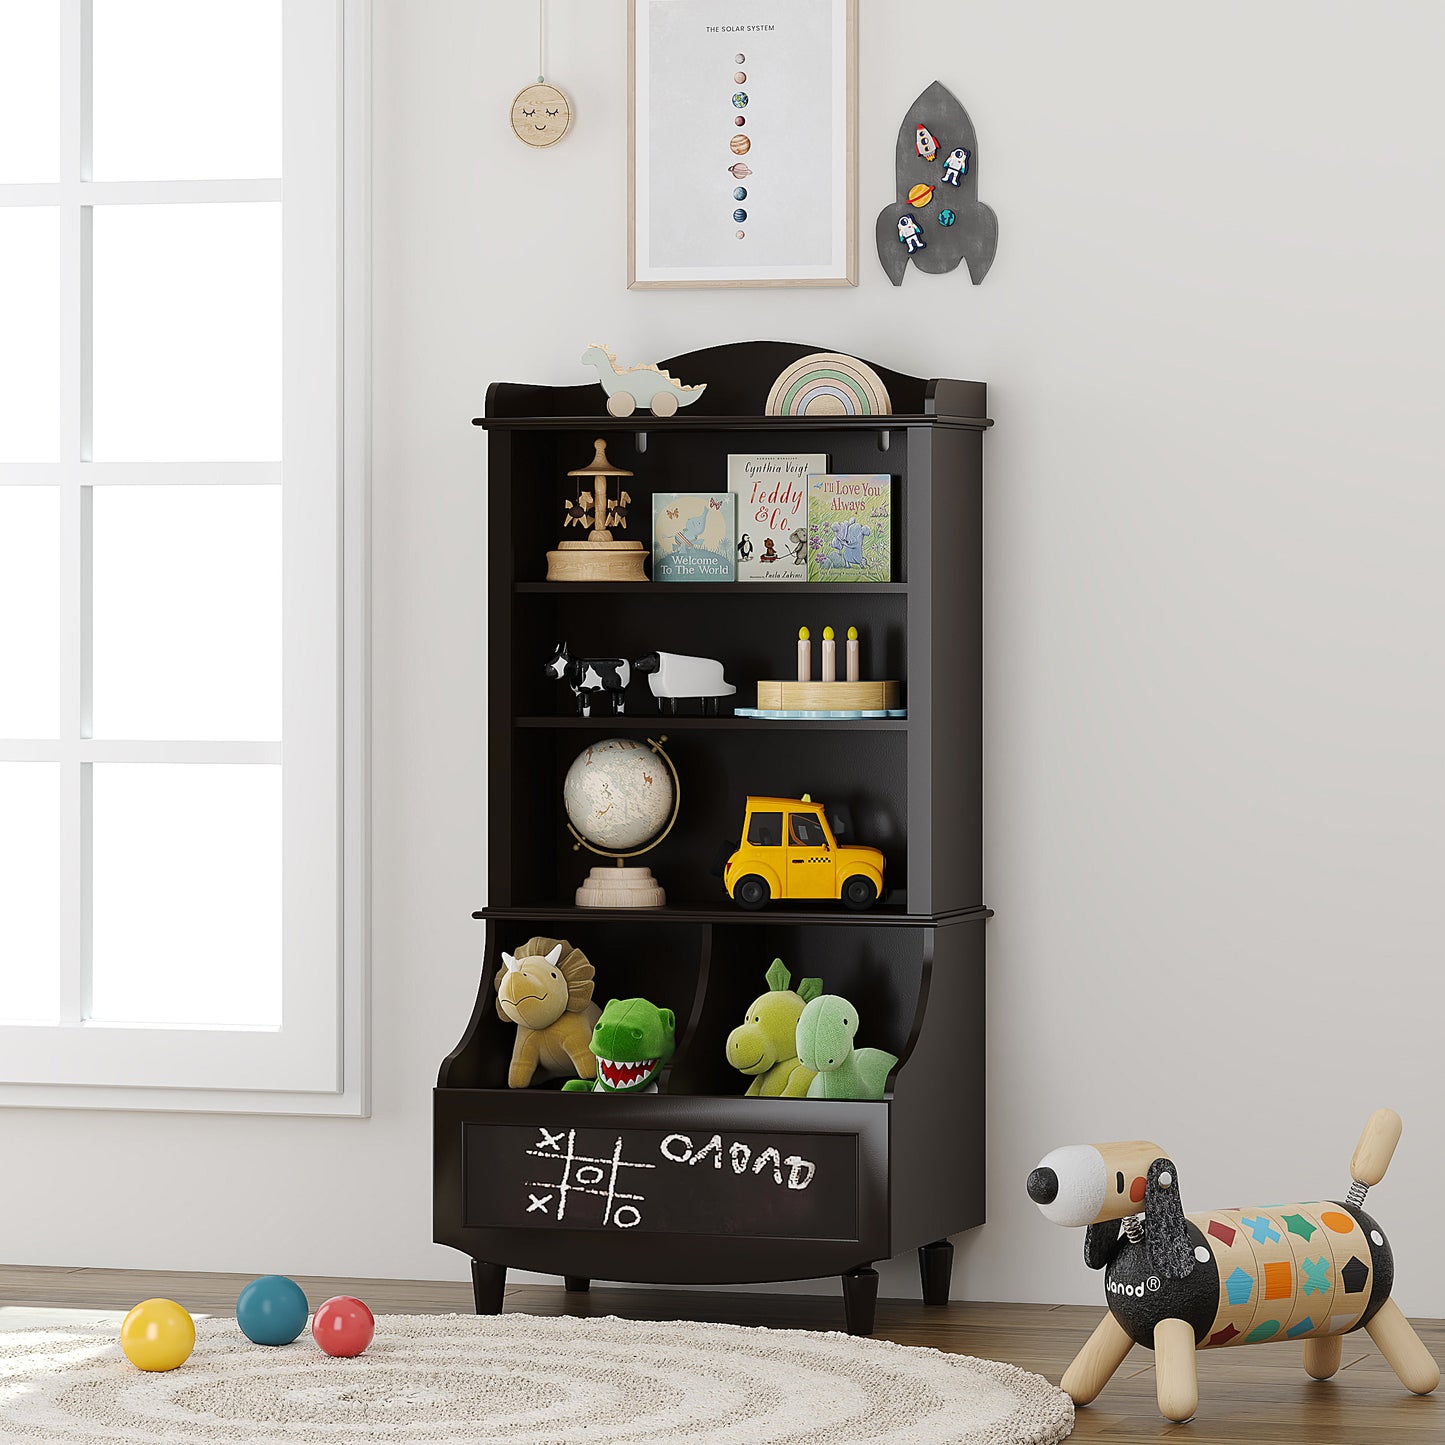 UTEX Kids Bookshelf and Toy Storage, Kids Wood Bookcase with Blackboard and Cubbies, Open Kids Bookshelf and Toy Organizer Cabinet, Kids Bookshelves Display Stand for Toddlers, White